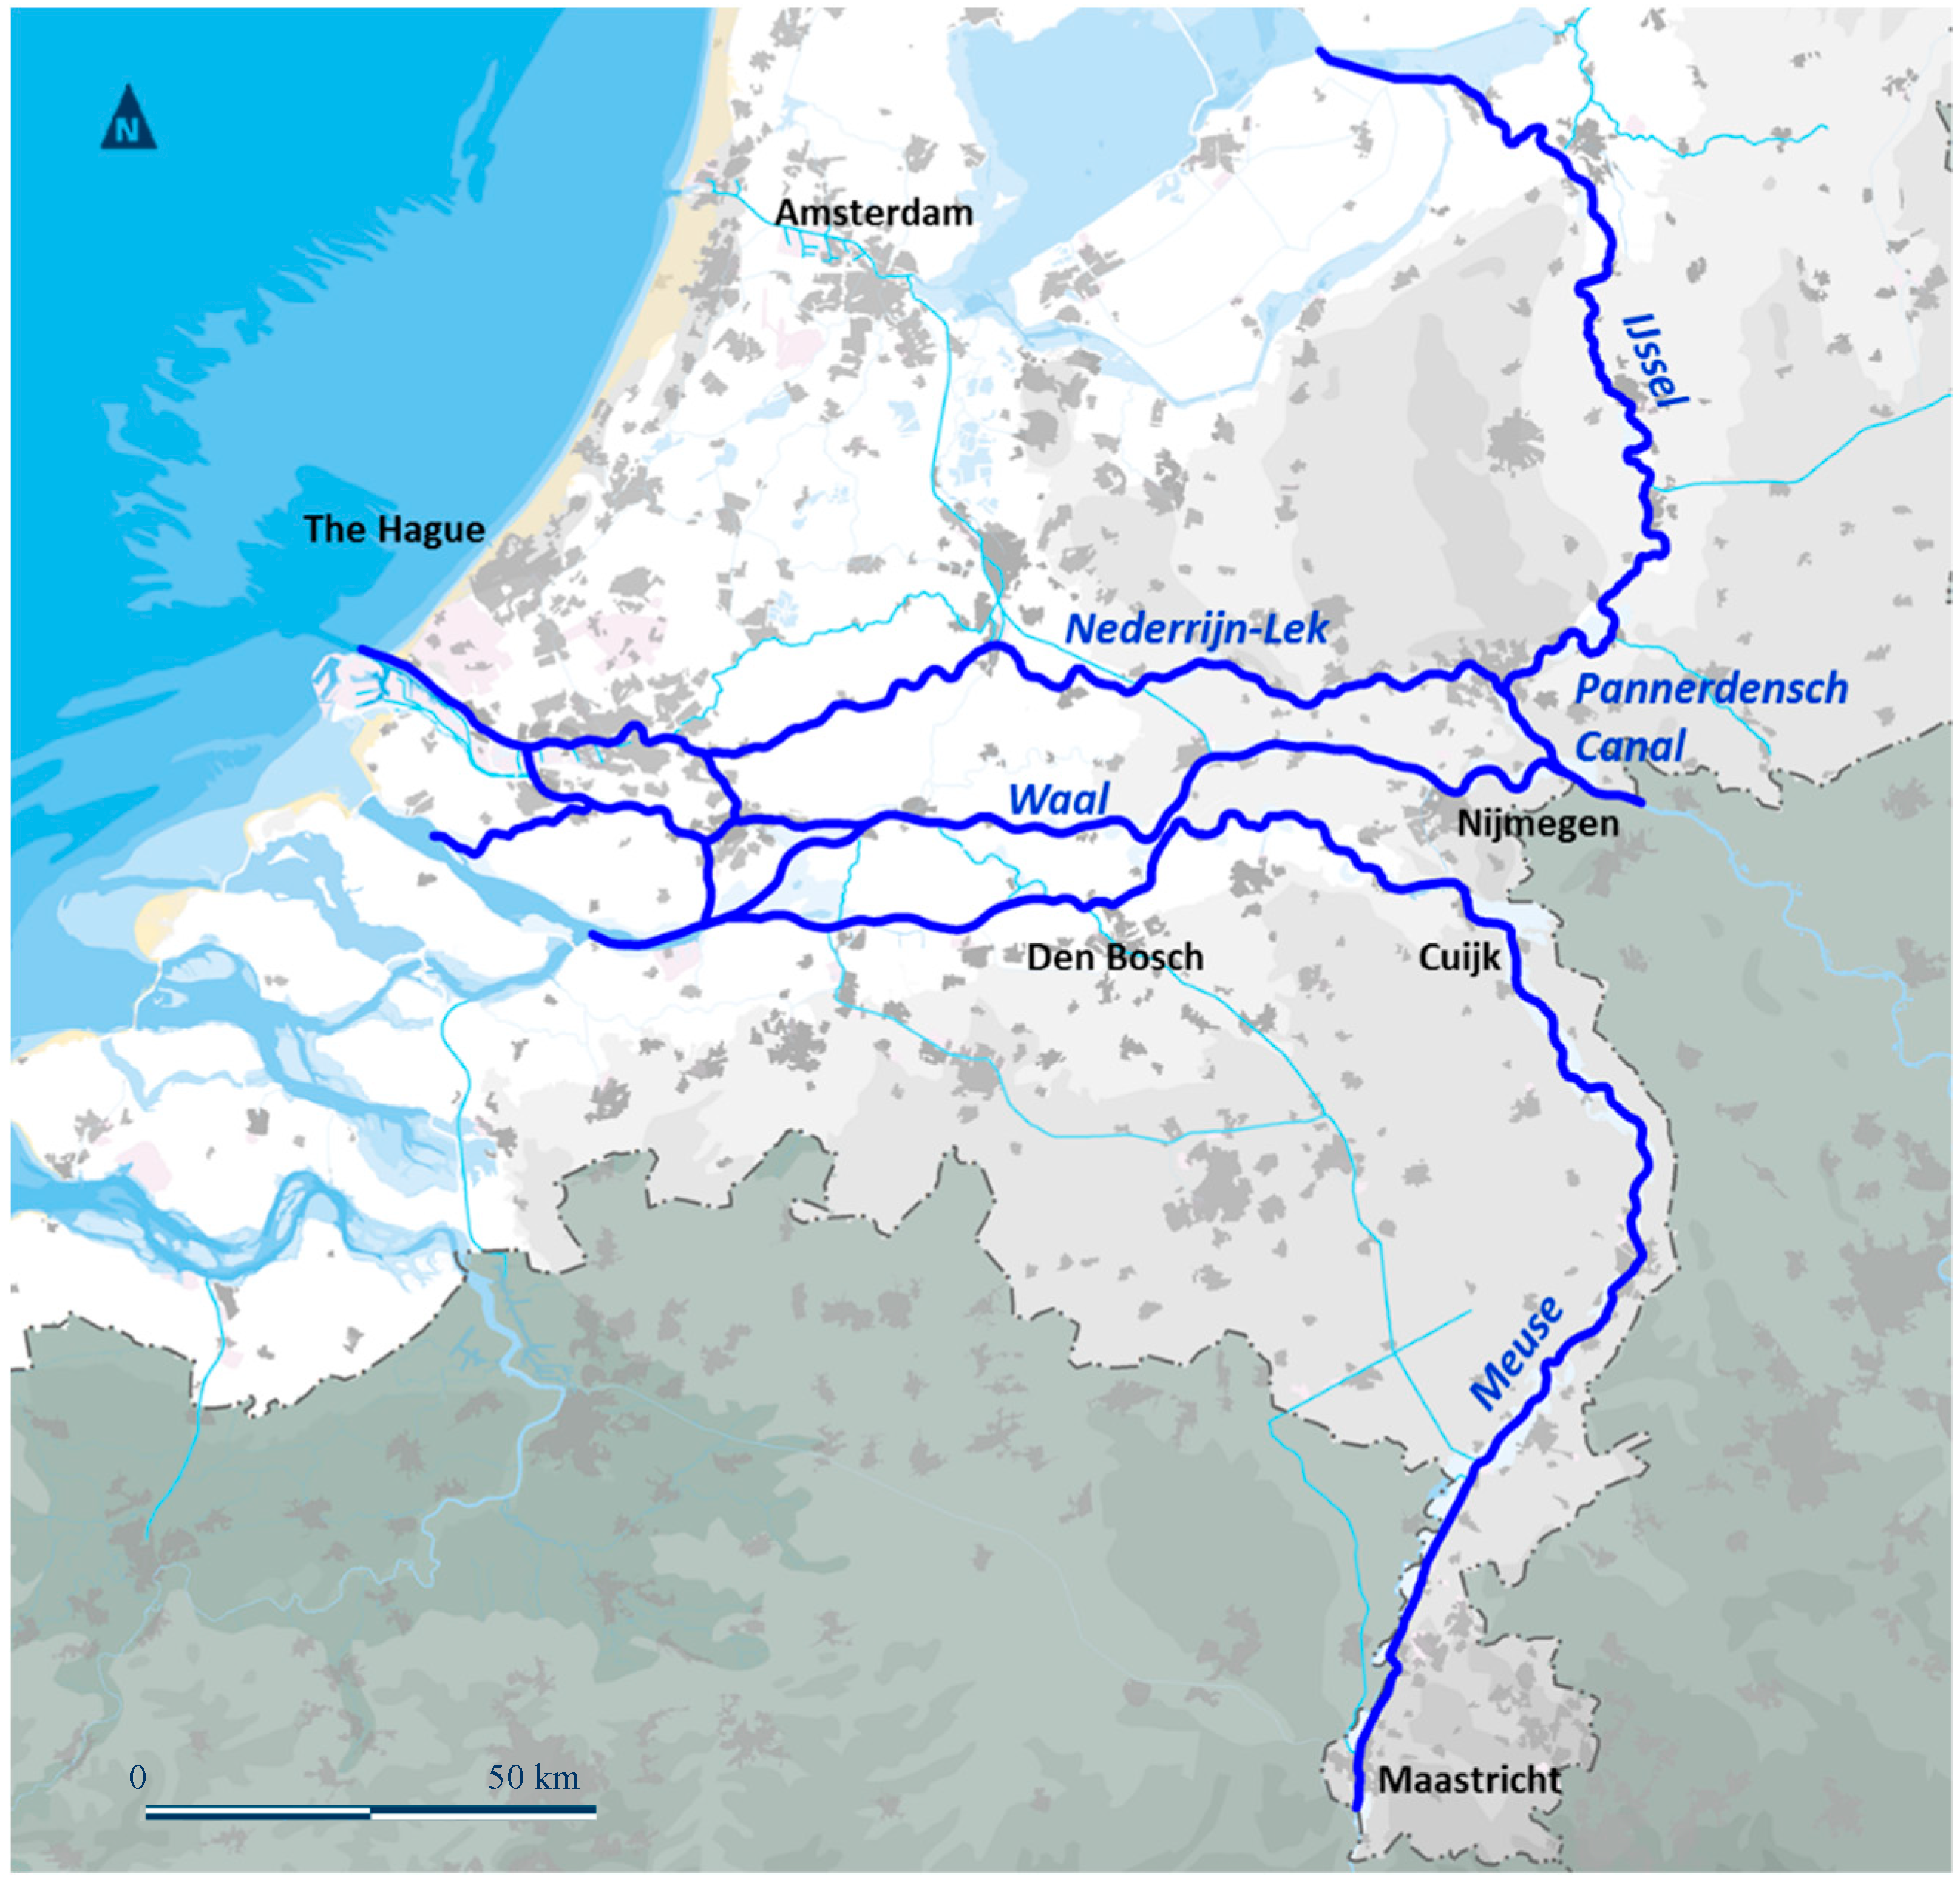 Geosciences | Free Full-Text | Room for Rivers: Risk Reduction by Enhancing  the Flood Conveyance Capacity of The Netherlands' Large Rivers | HTML